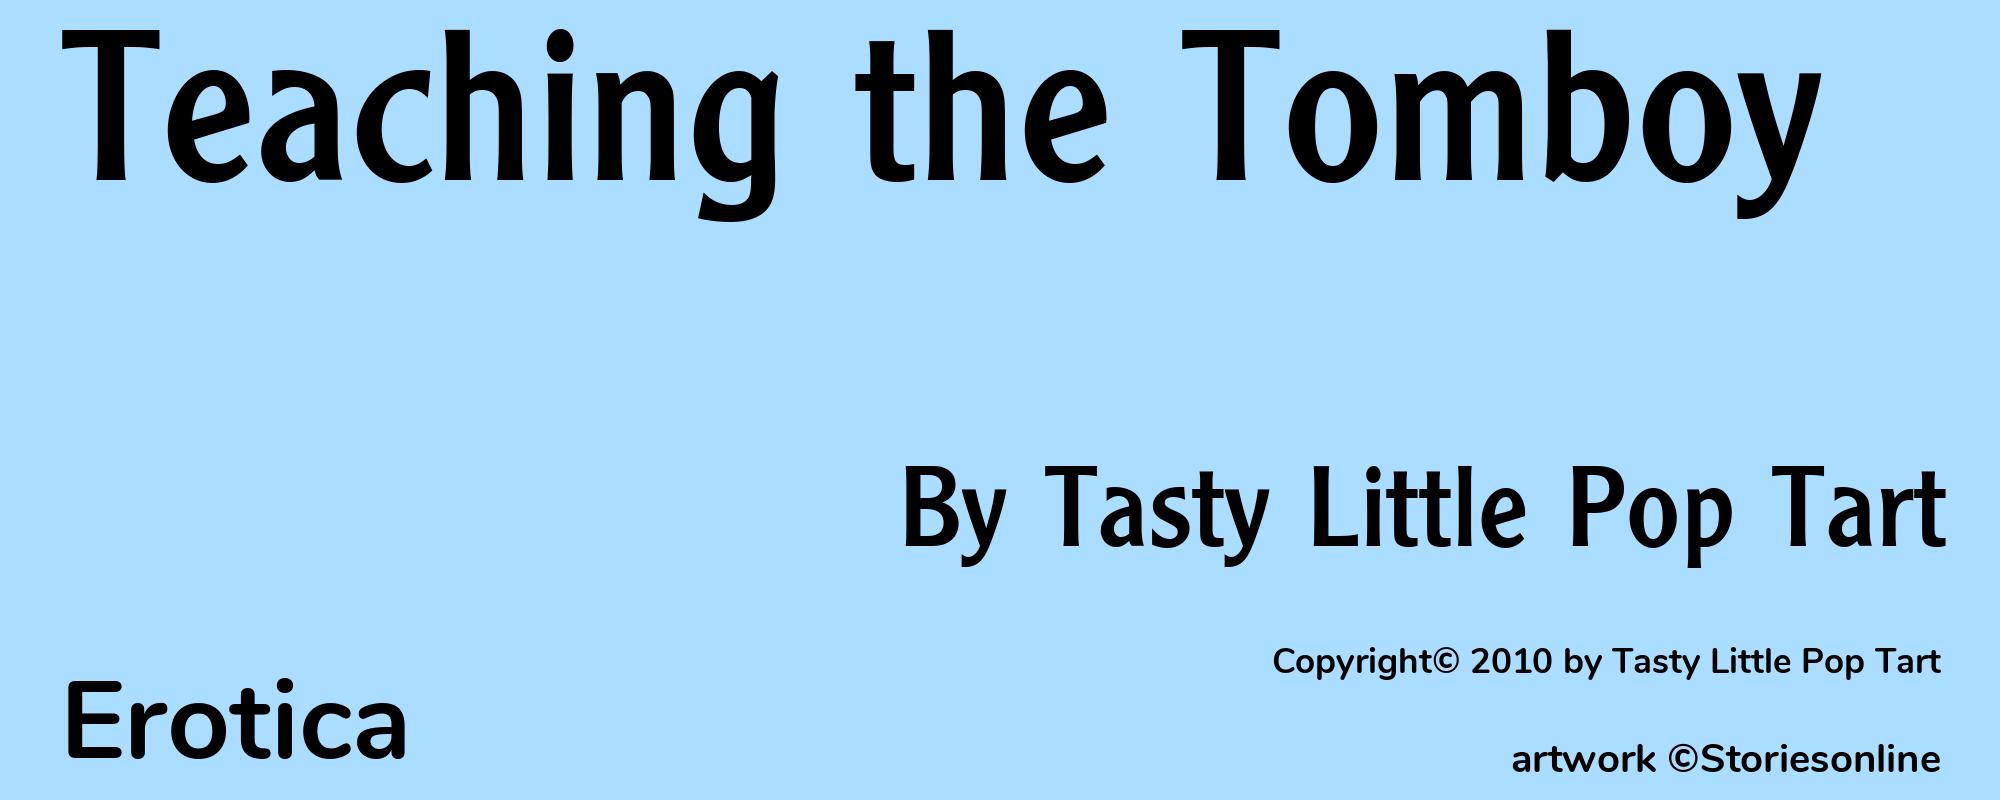 Teaching the Tomboy - Cover